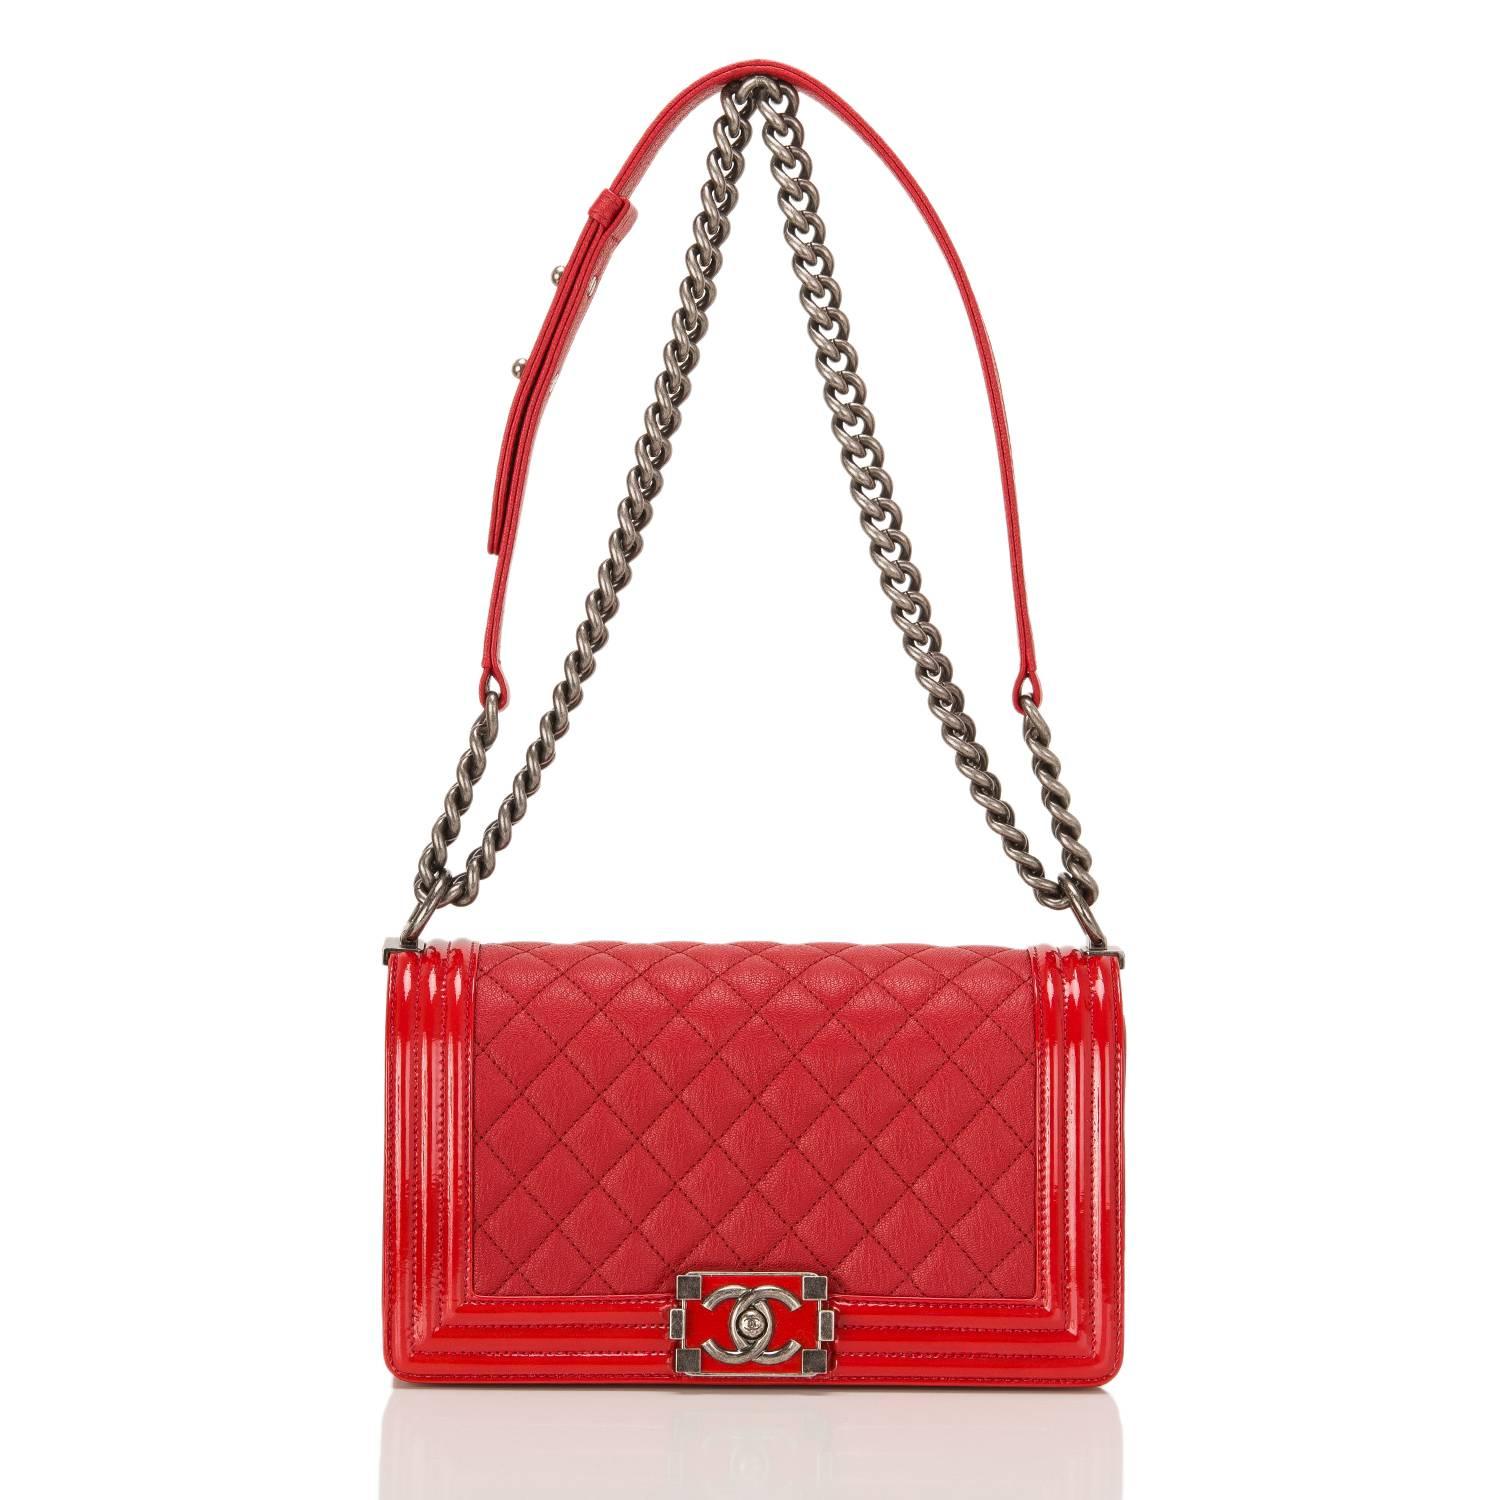 Chanel Red Quilted Goatskin Medium Boy Bag With Patent Trim 1